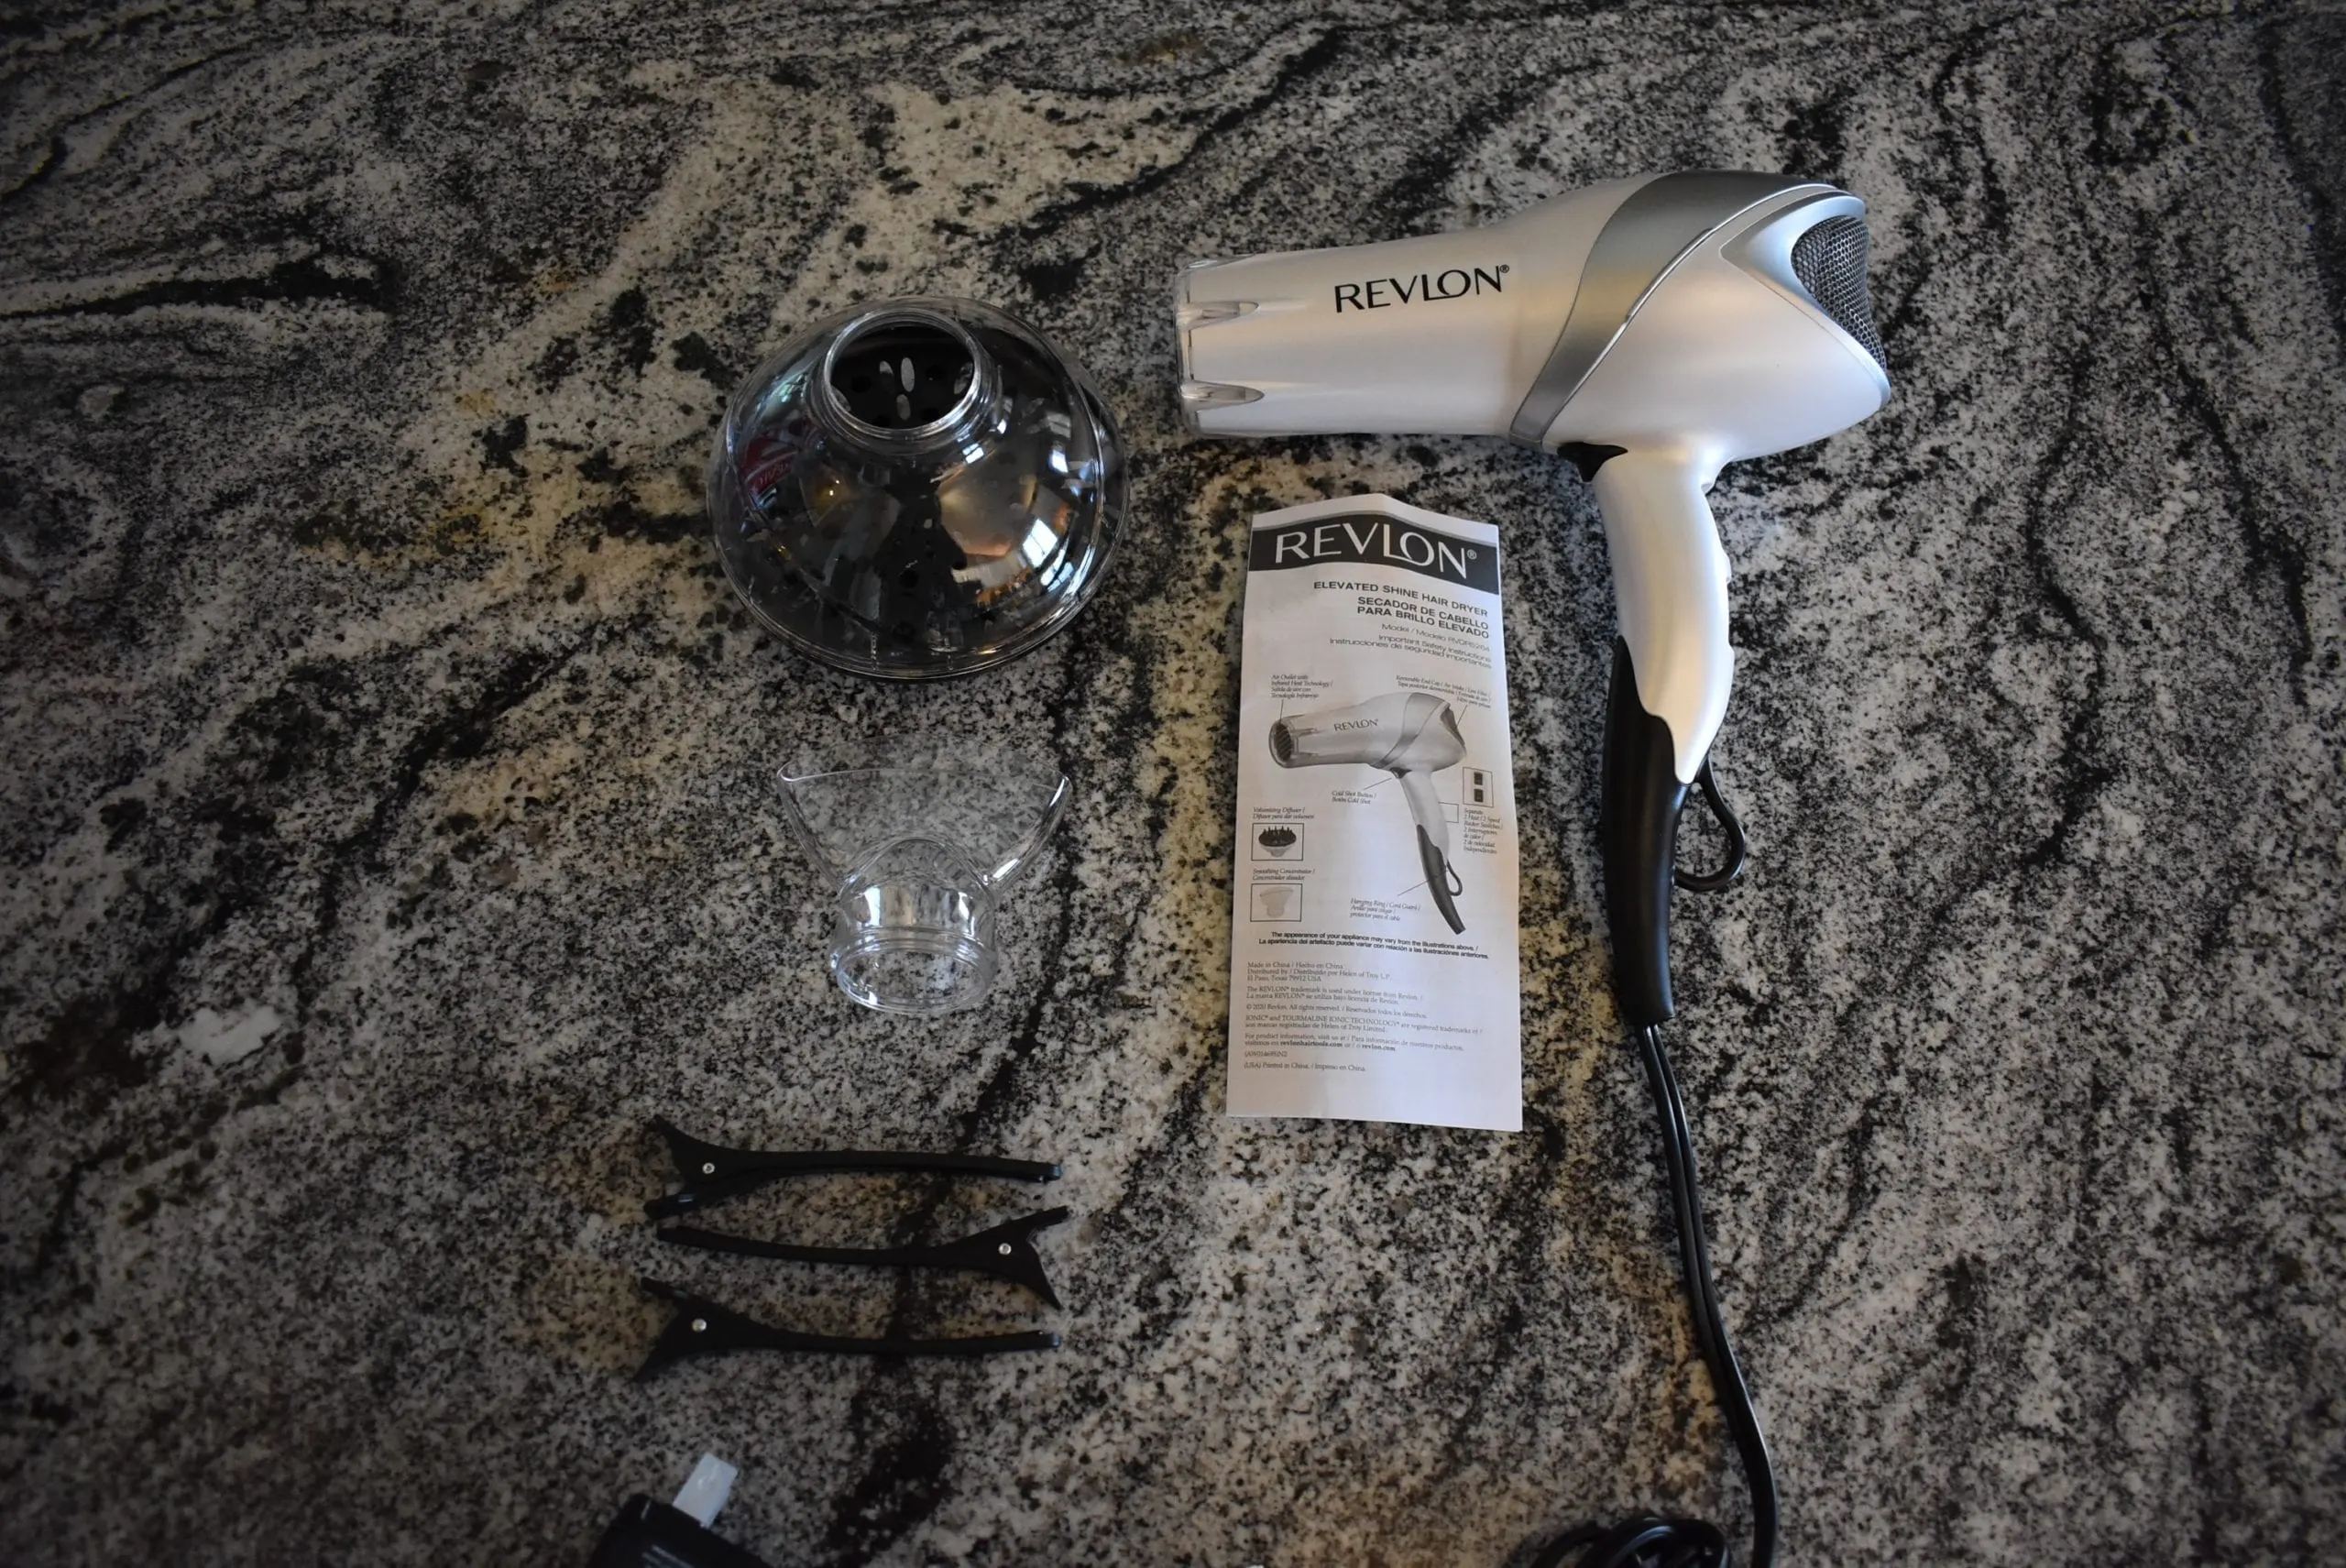 The Revlon hair dryer and its attachments sitting on the granite counter